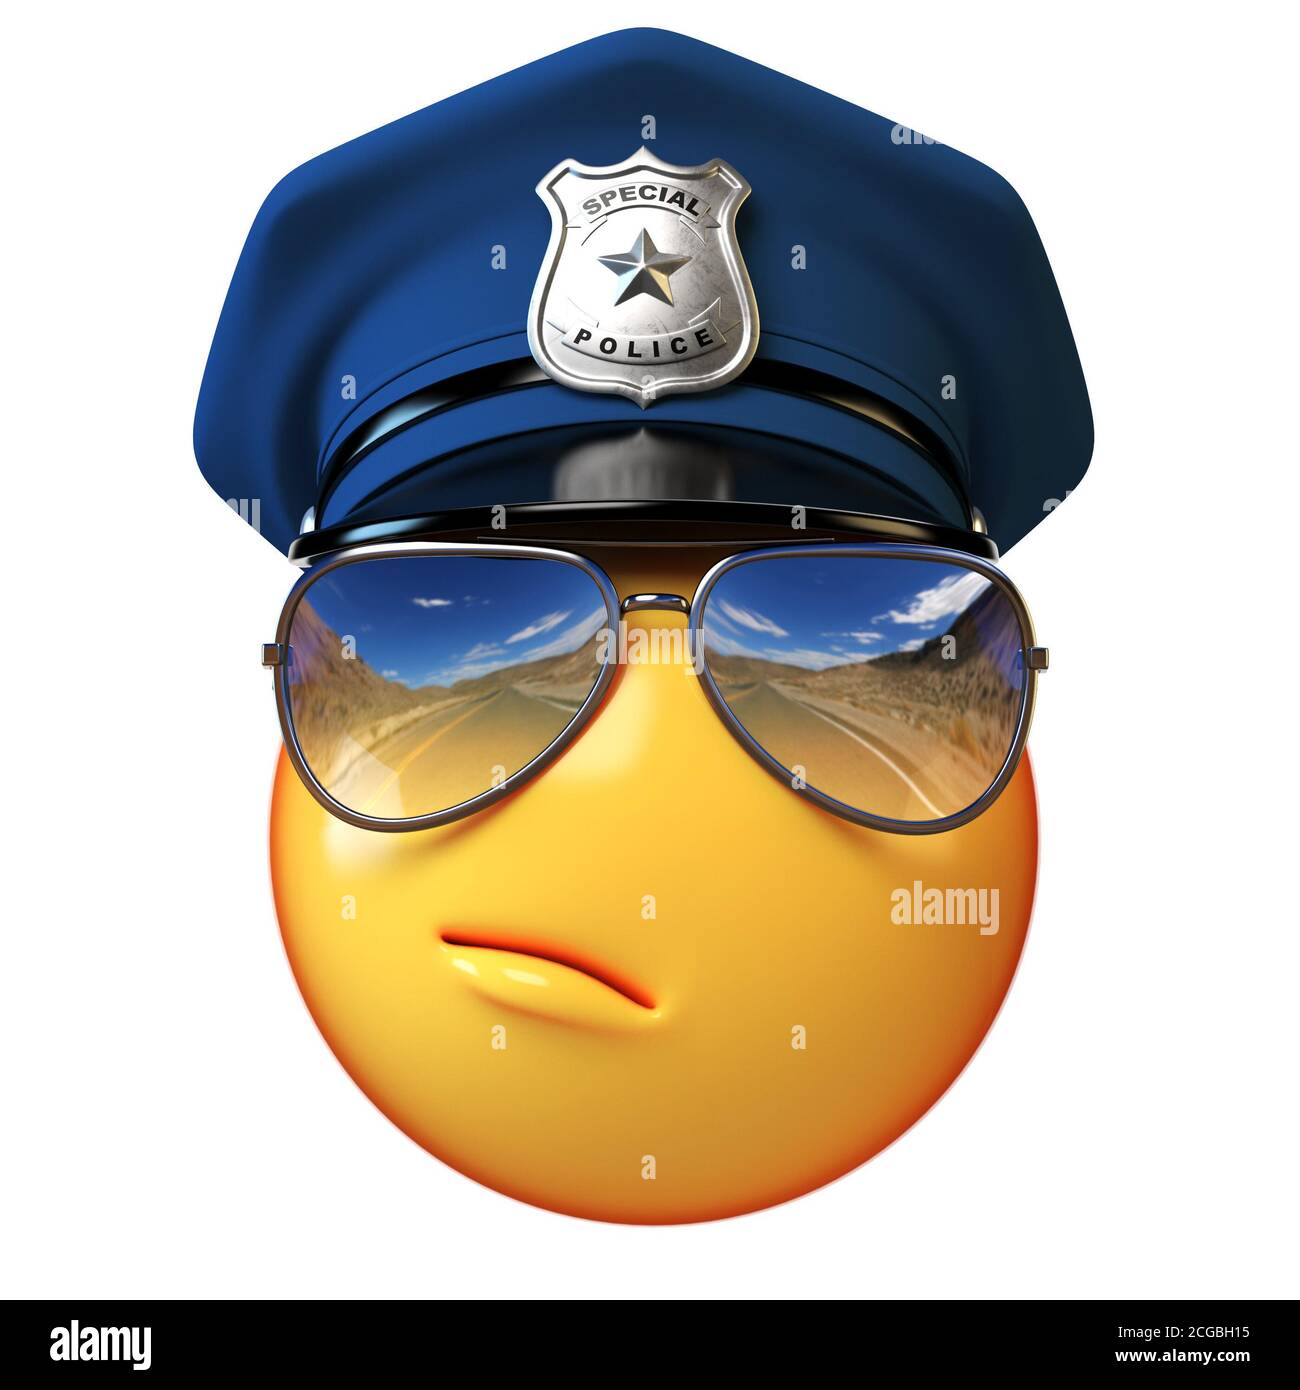 Policeman emoji isolated on white background, cop with sunglasses emoticon 3d rendering Stock Photo